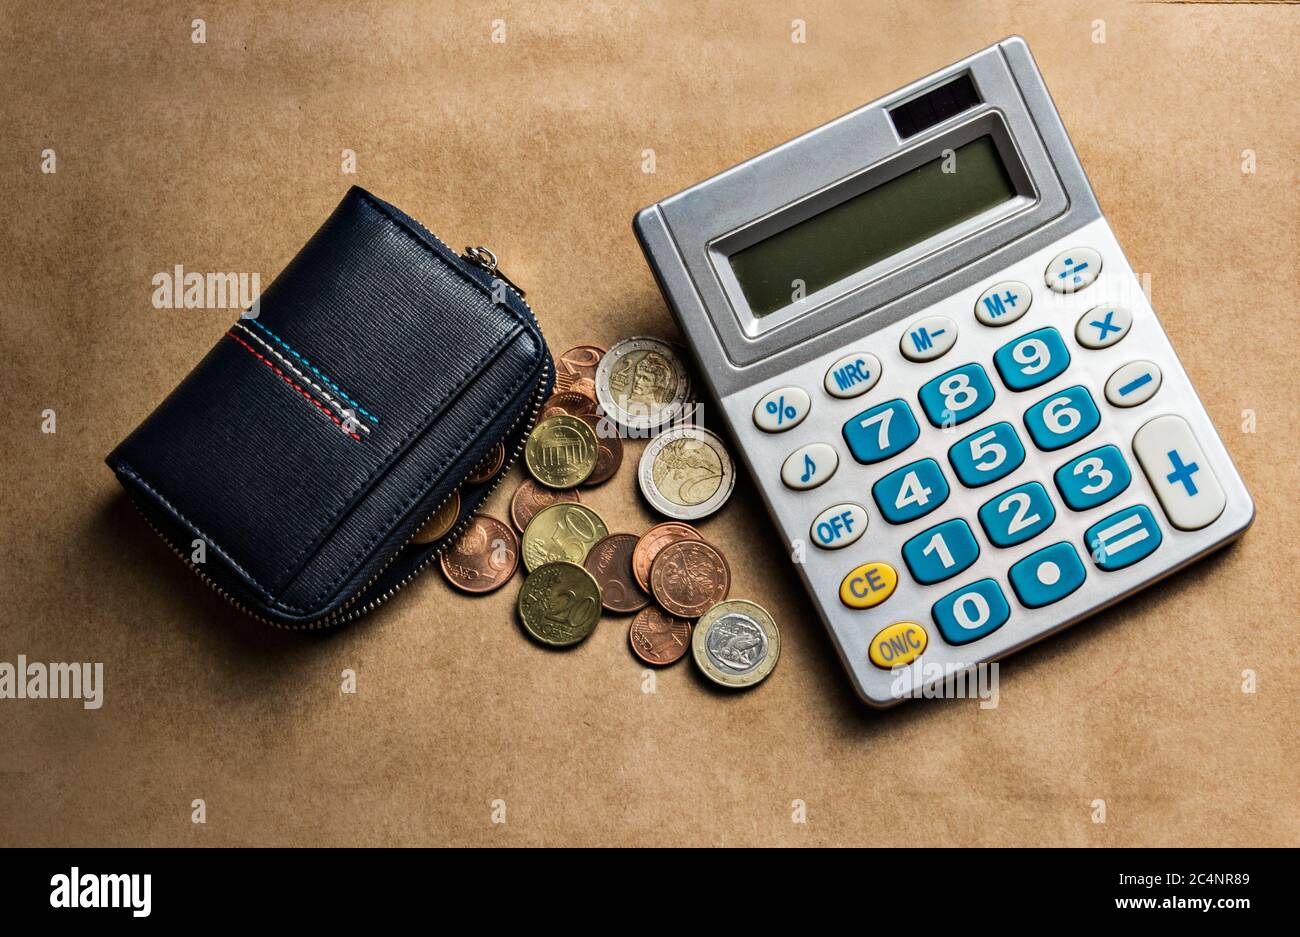 Personal finance control wallet with euro coins and calculator Stock Photo